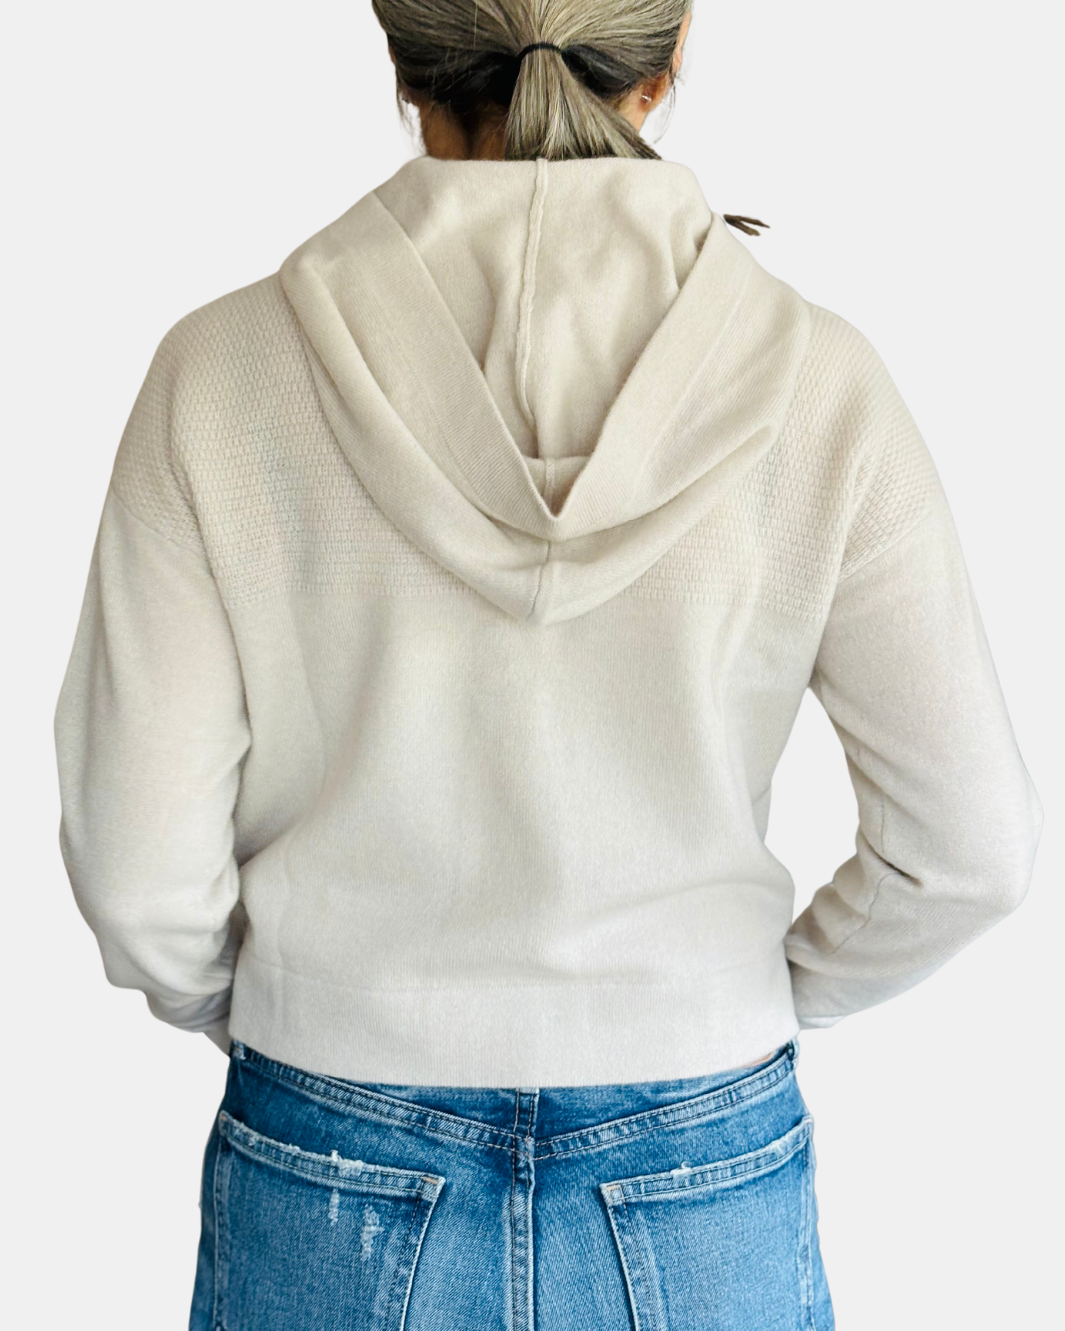 JENNA CROPPED HOODIE IN FOG - Romi Boutique